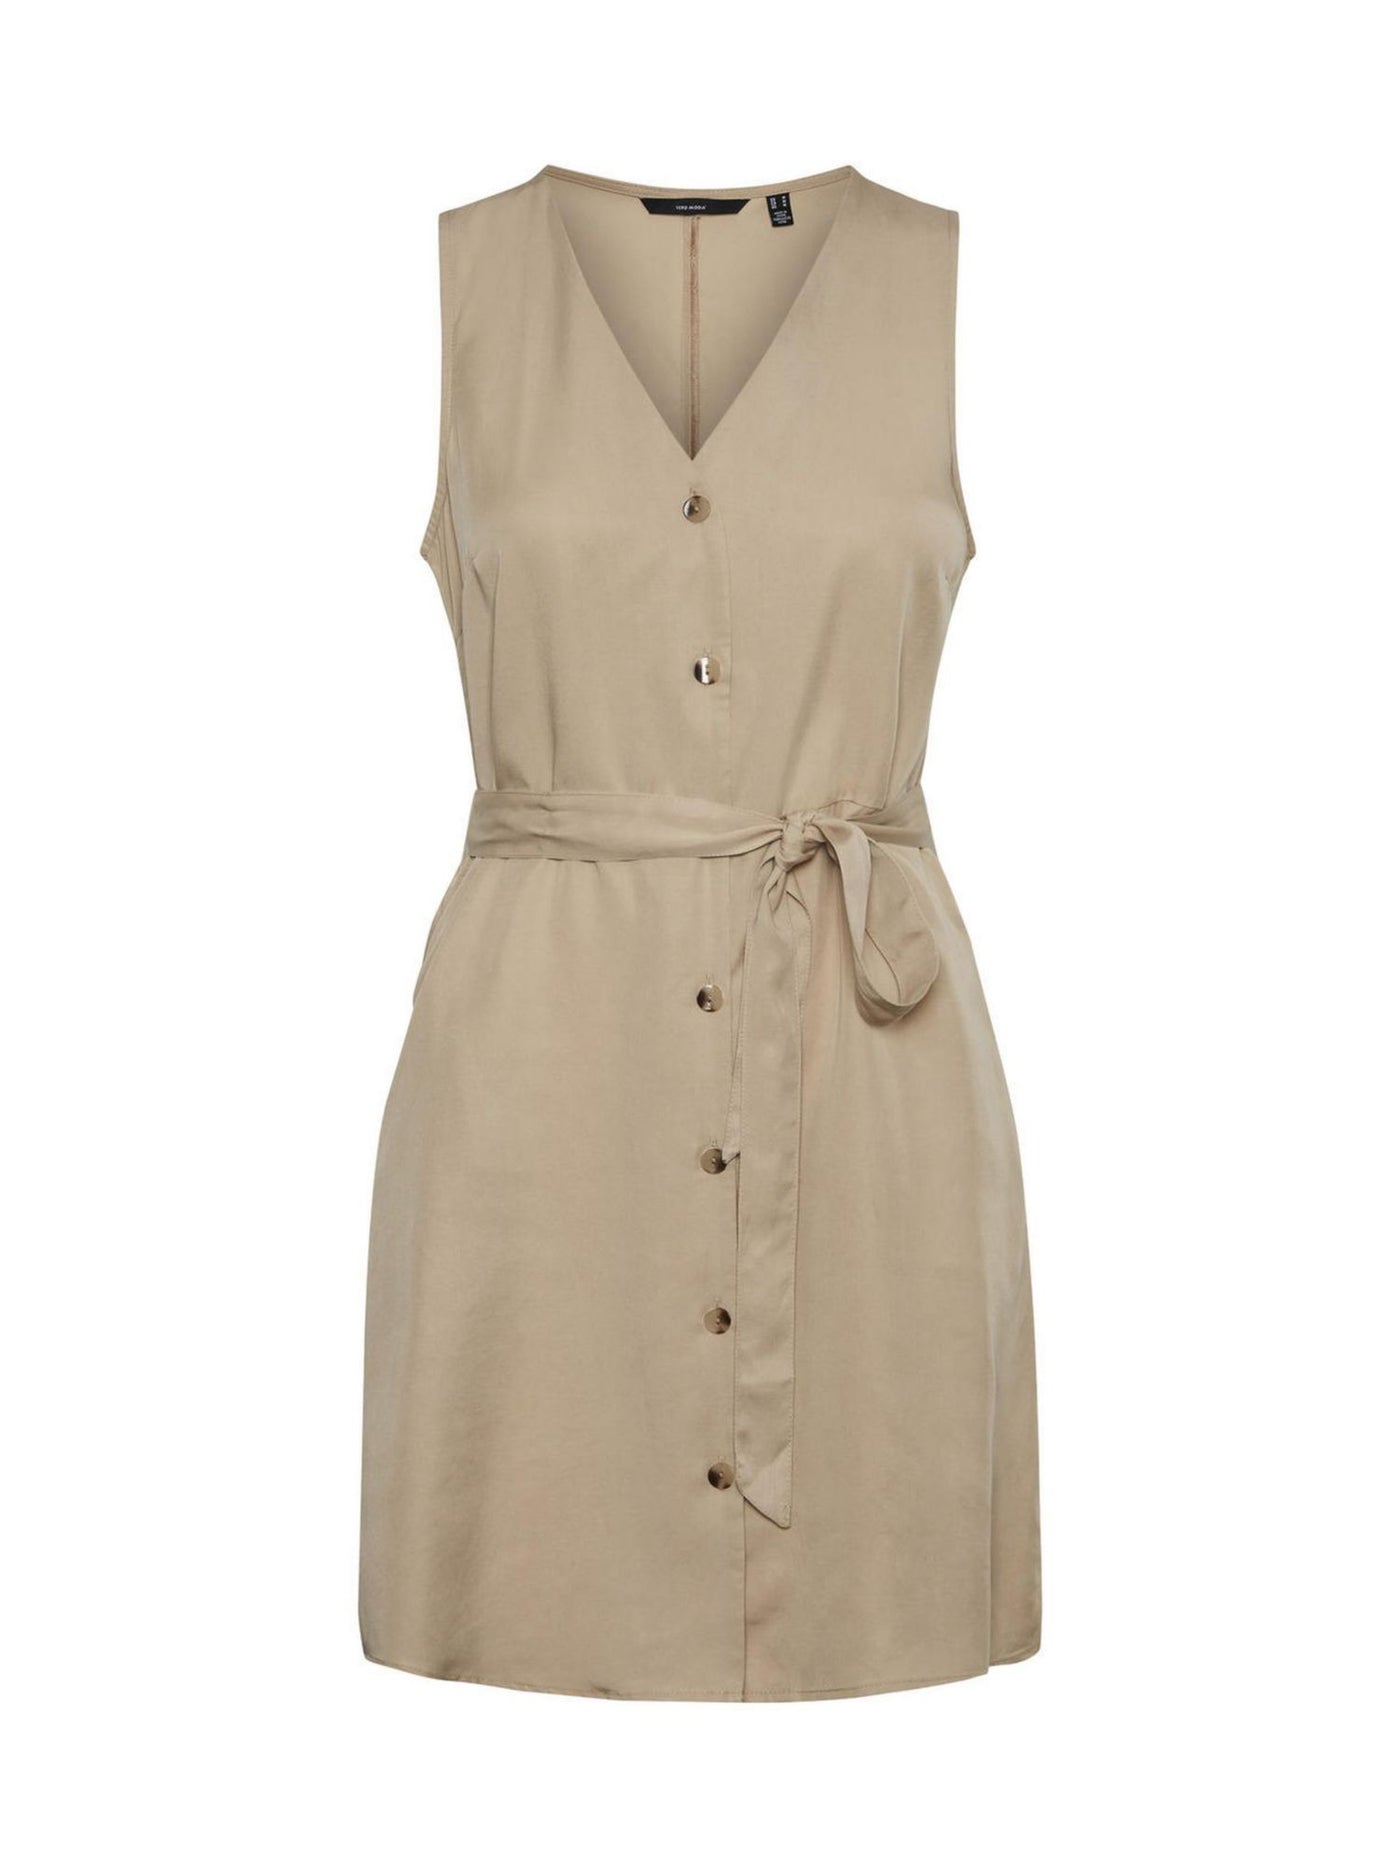 VERO MODA Womens Beige Darted Belted Button Down Front Sleeveless V Neck Short Fit + Flare Dress XL